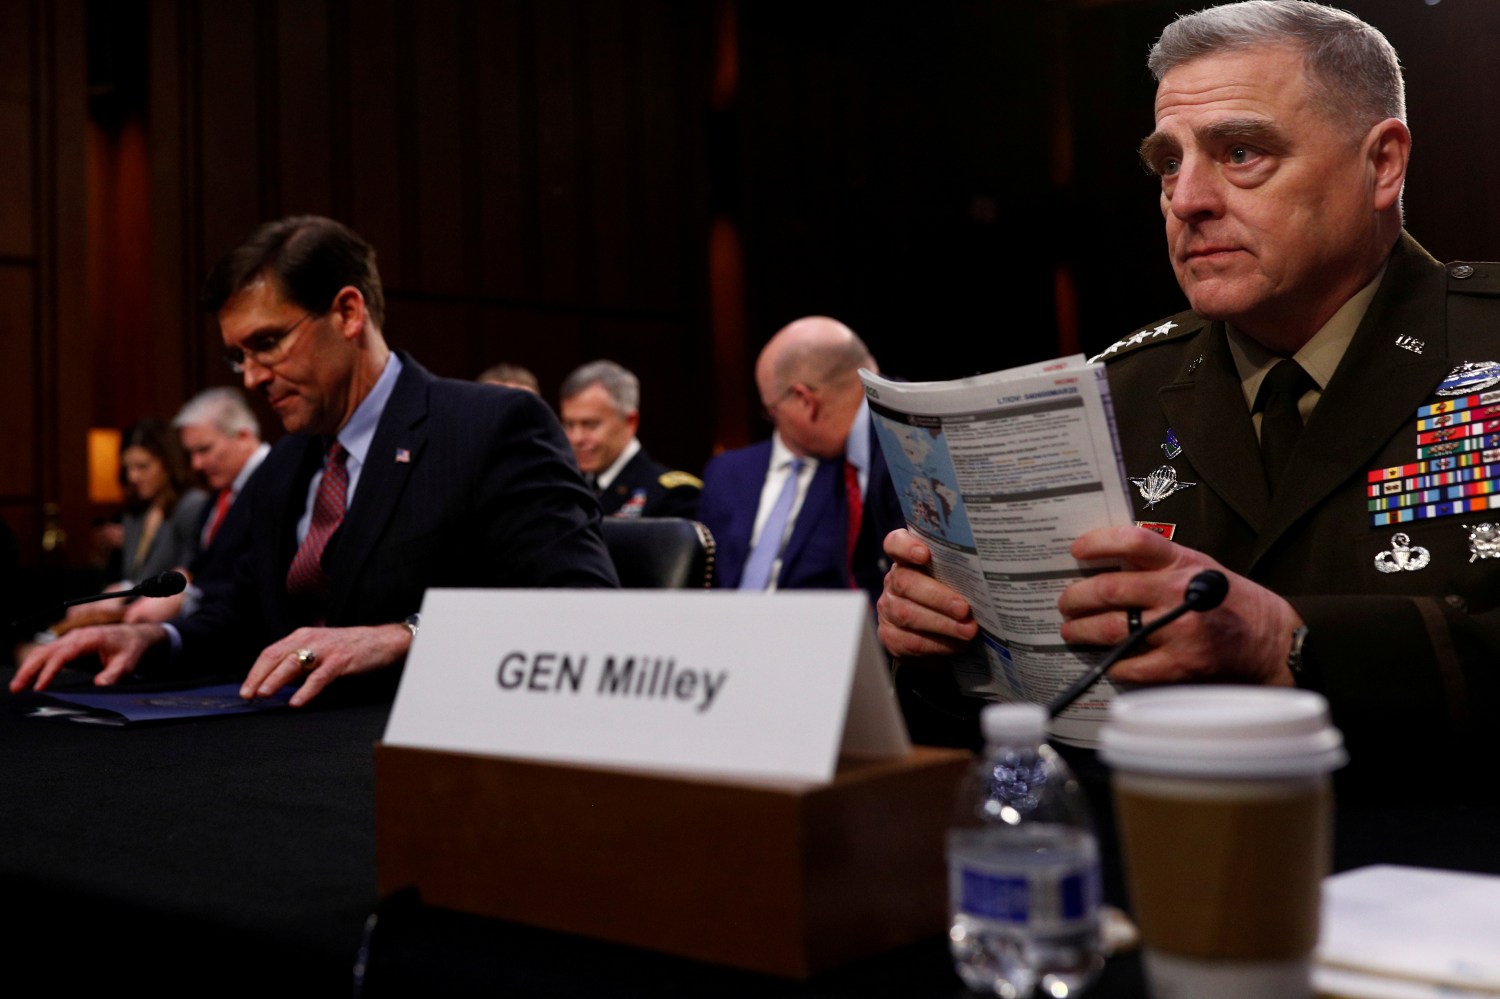 FILE PHOTO: U.S. Chairman of the Joint Chiefs of Staff Gen. Mark A. Milley testifies beside U.S. Defense Secretary Mark Esper before a Senate Armed Services Committee hearing on "Department of Defense Budget Posture" on Capitol Hill in Washington, U.S., March 4, 2020.  REUTERS/Tom Brenner/File Photo